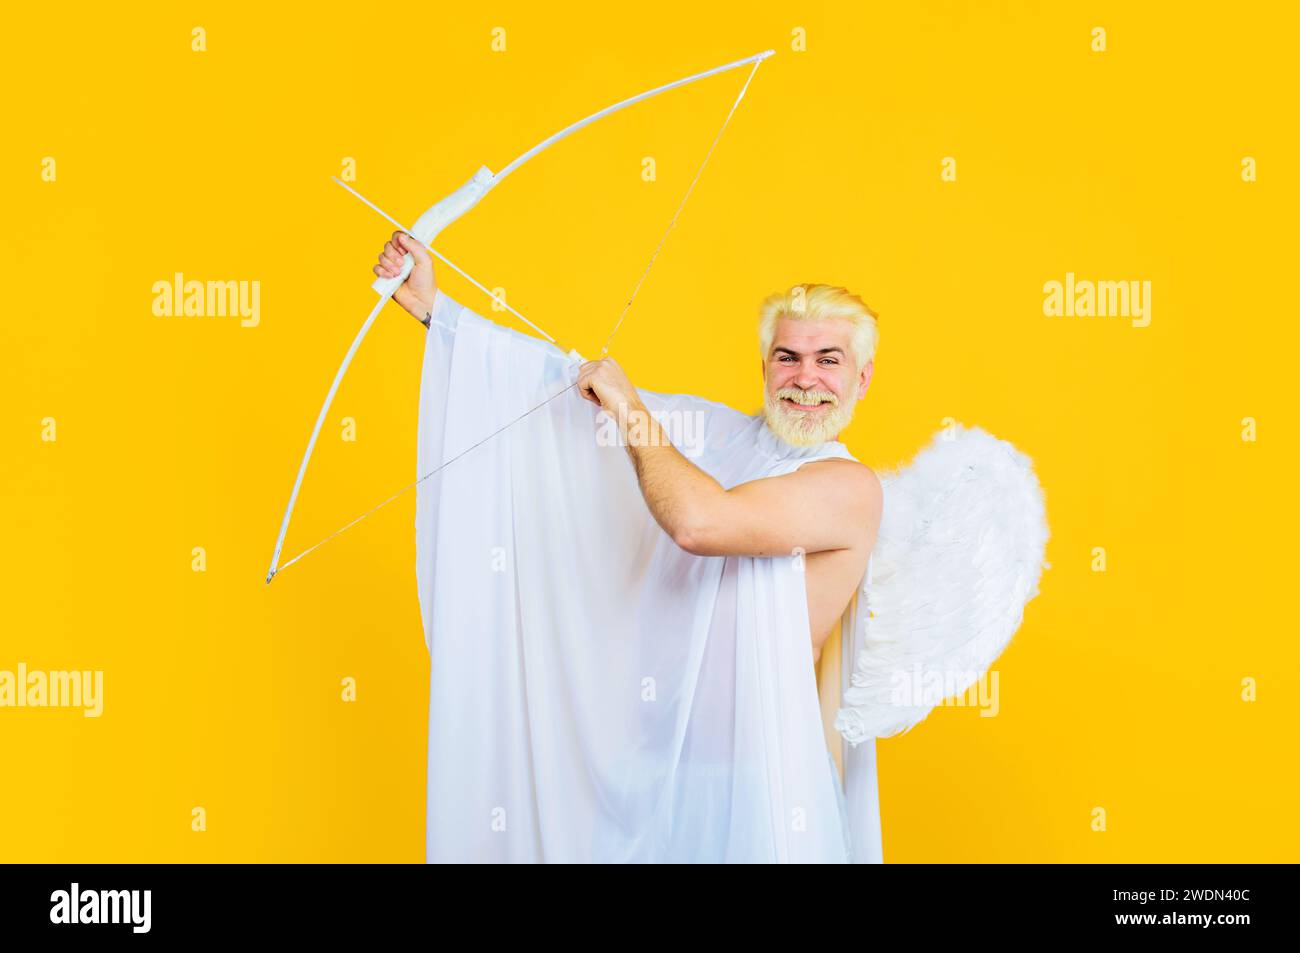 Valentines Day celebration. Smiling bearded man in angel costume aiming with bow. God of love. Valentines day cupid in angel wings with bow. Male Stock Photo